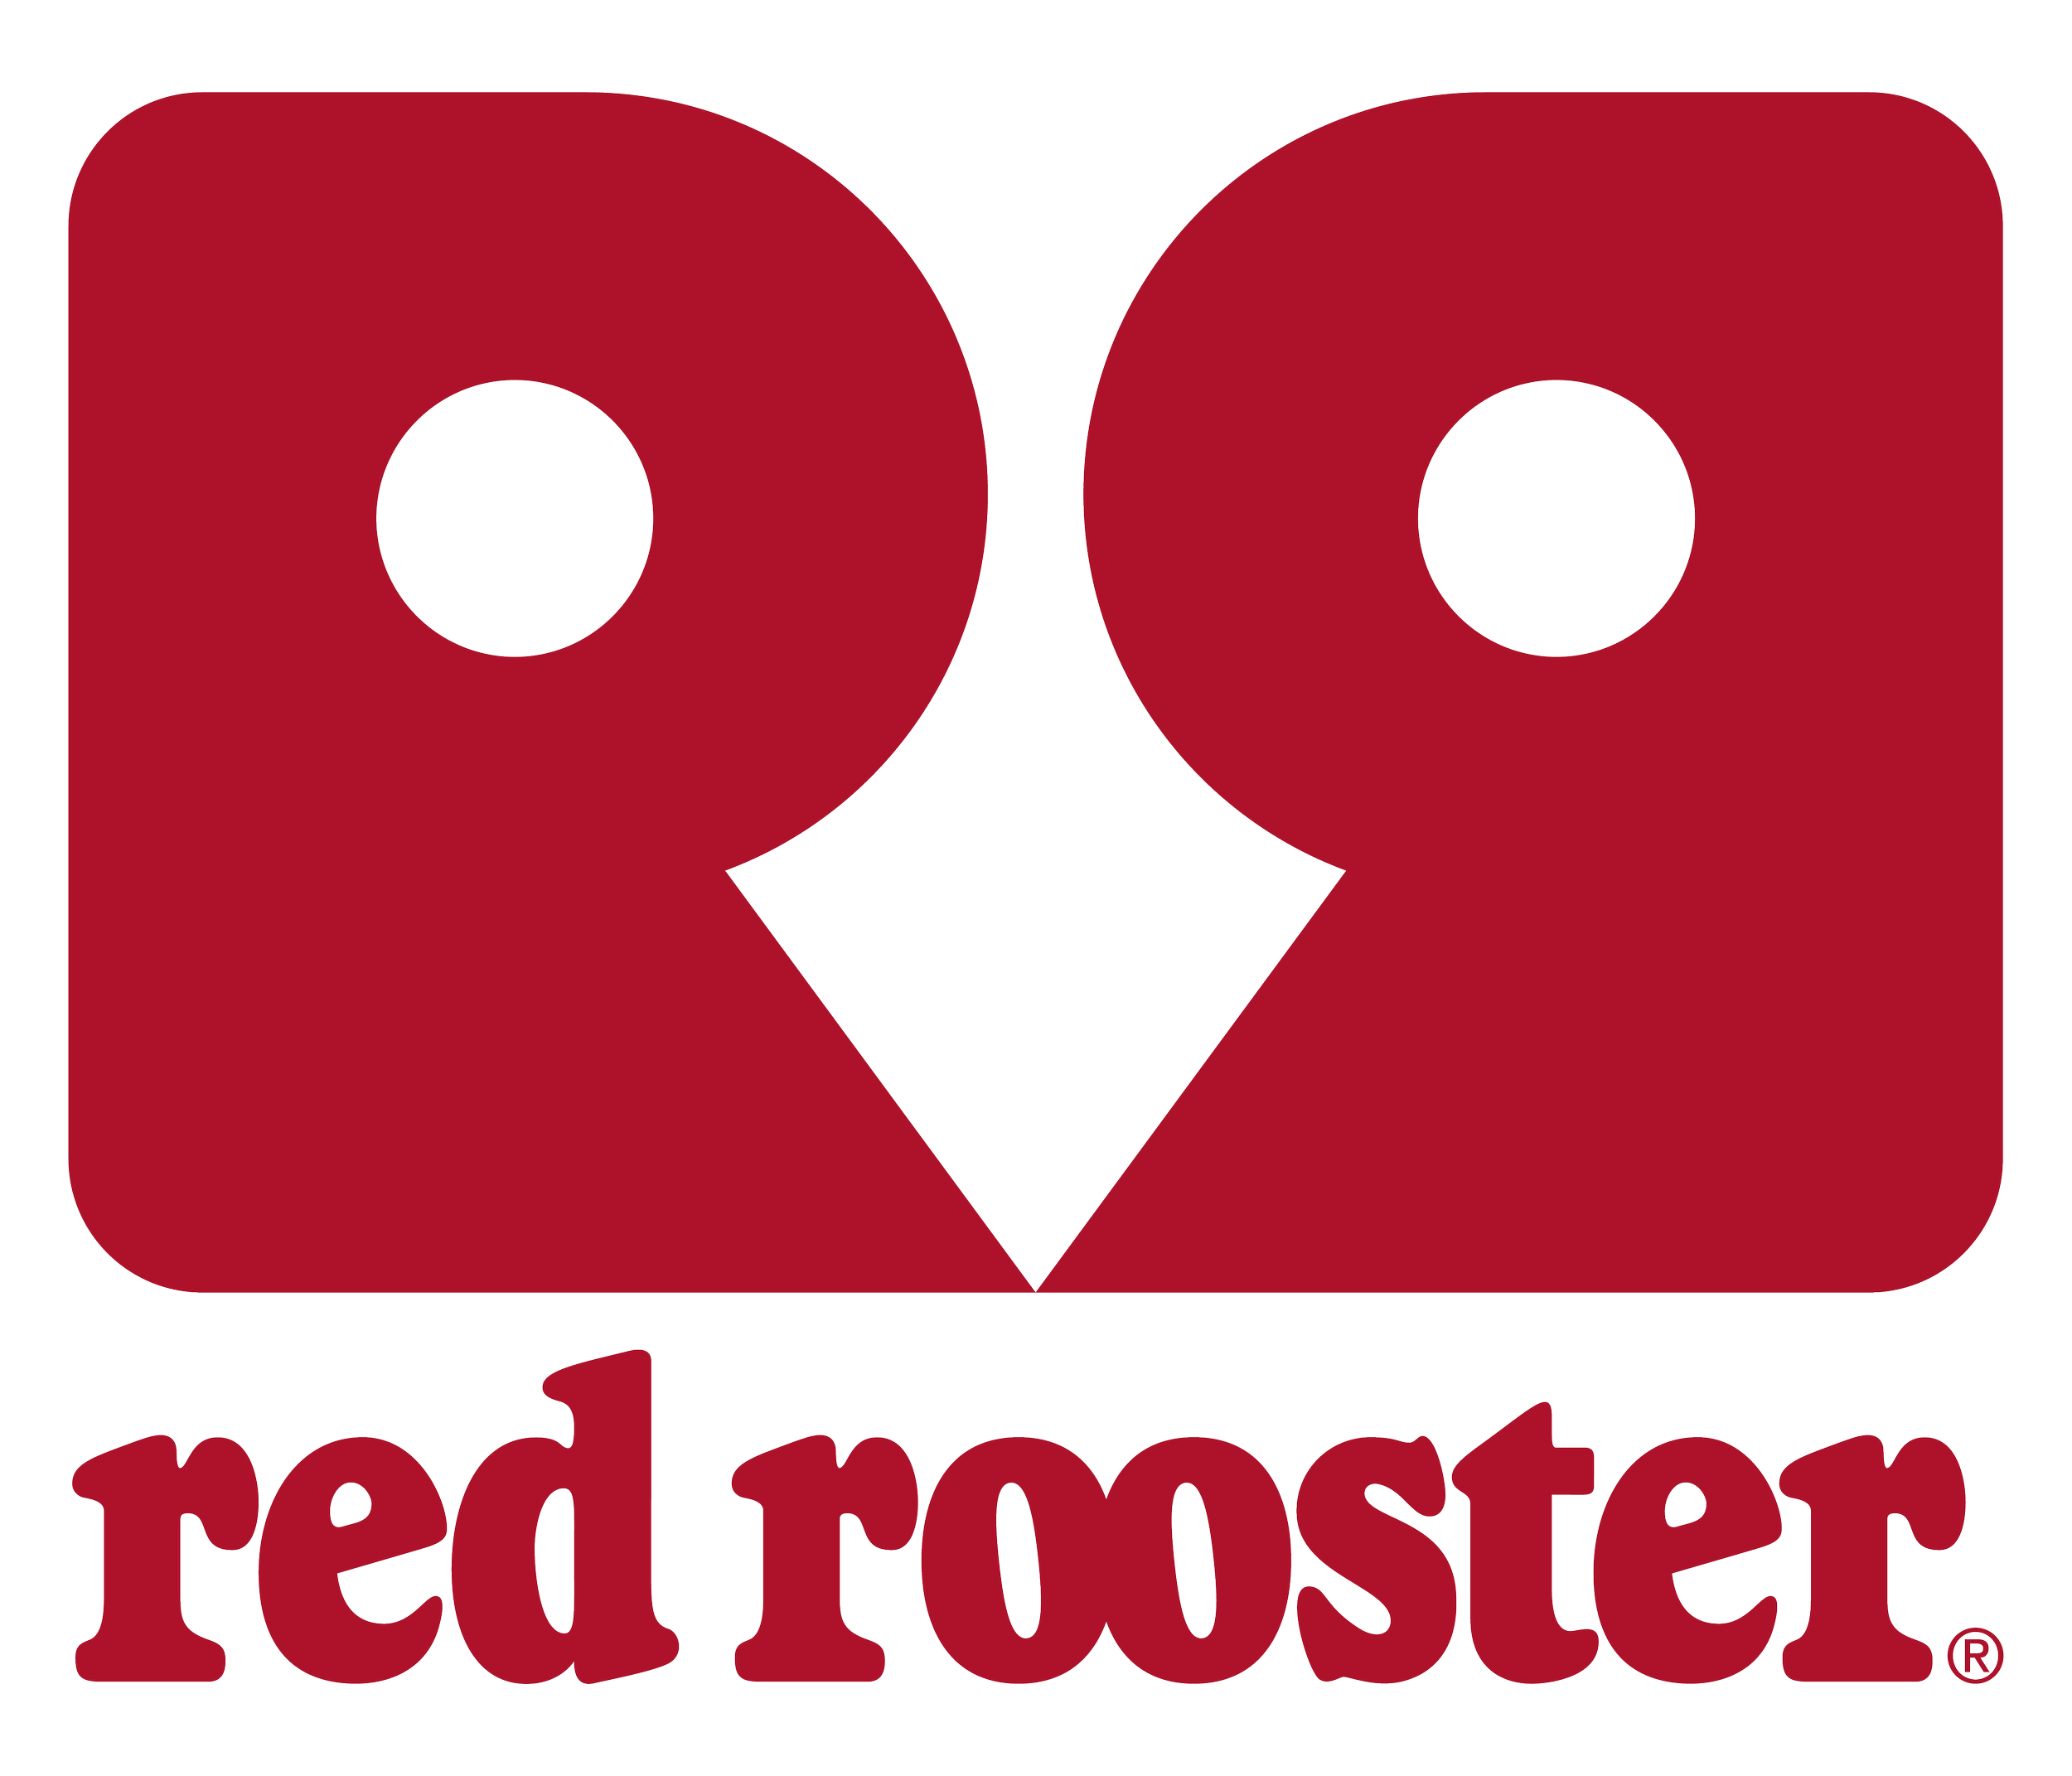 red-rooster.png